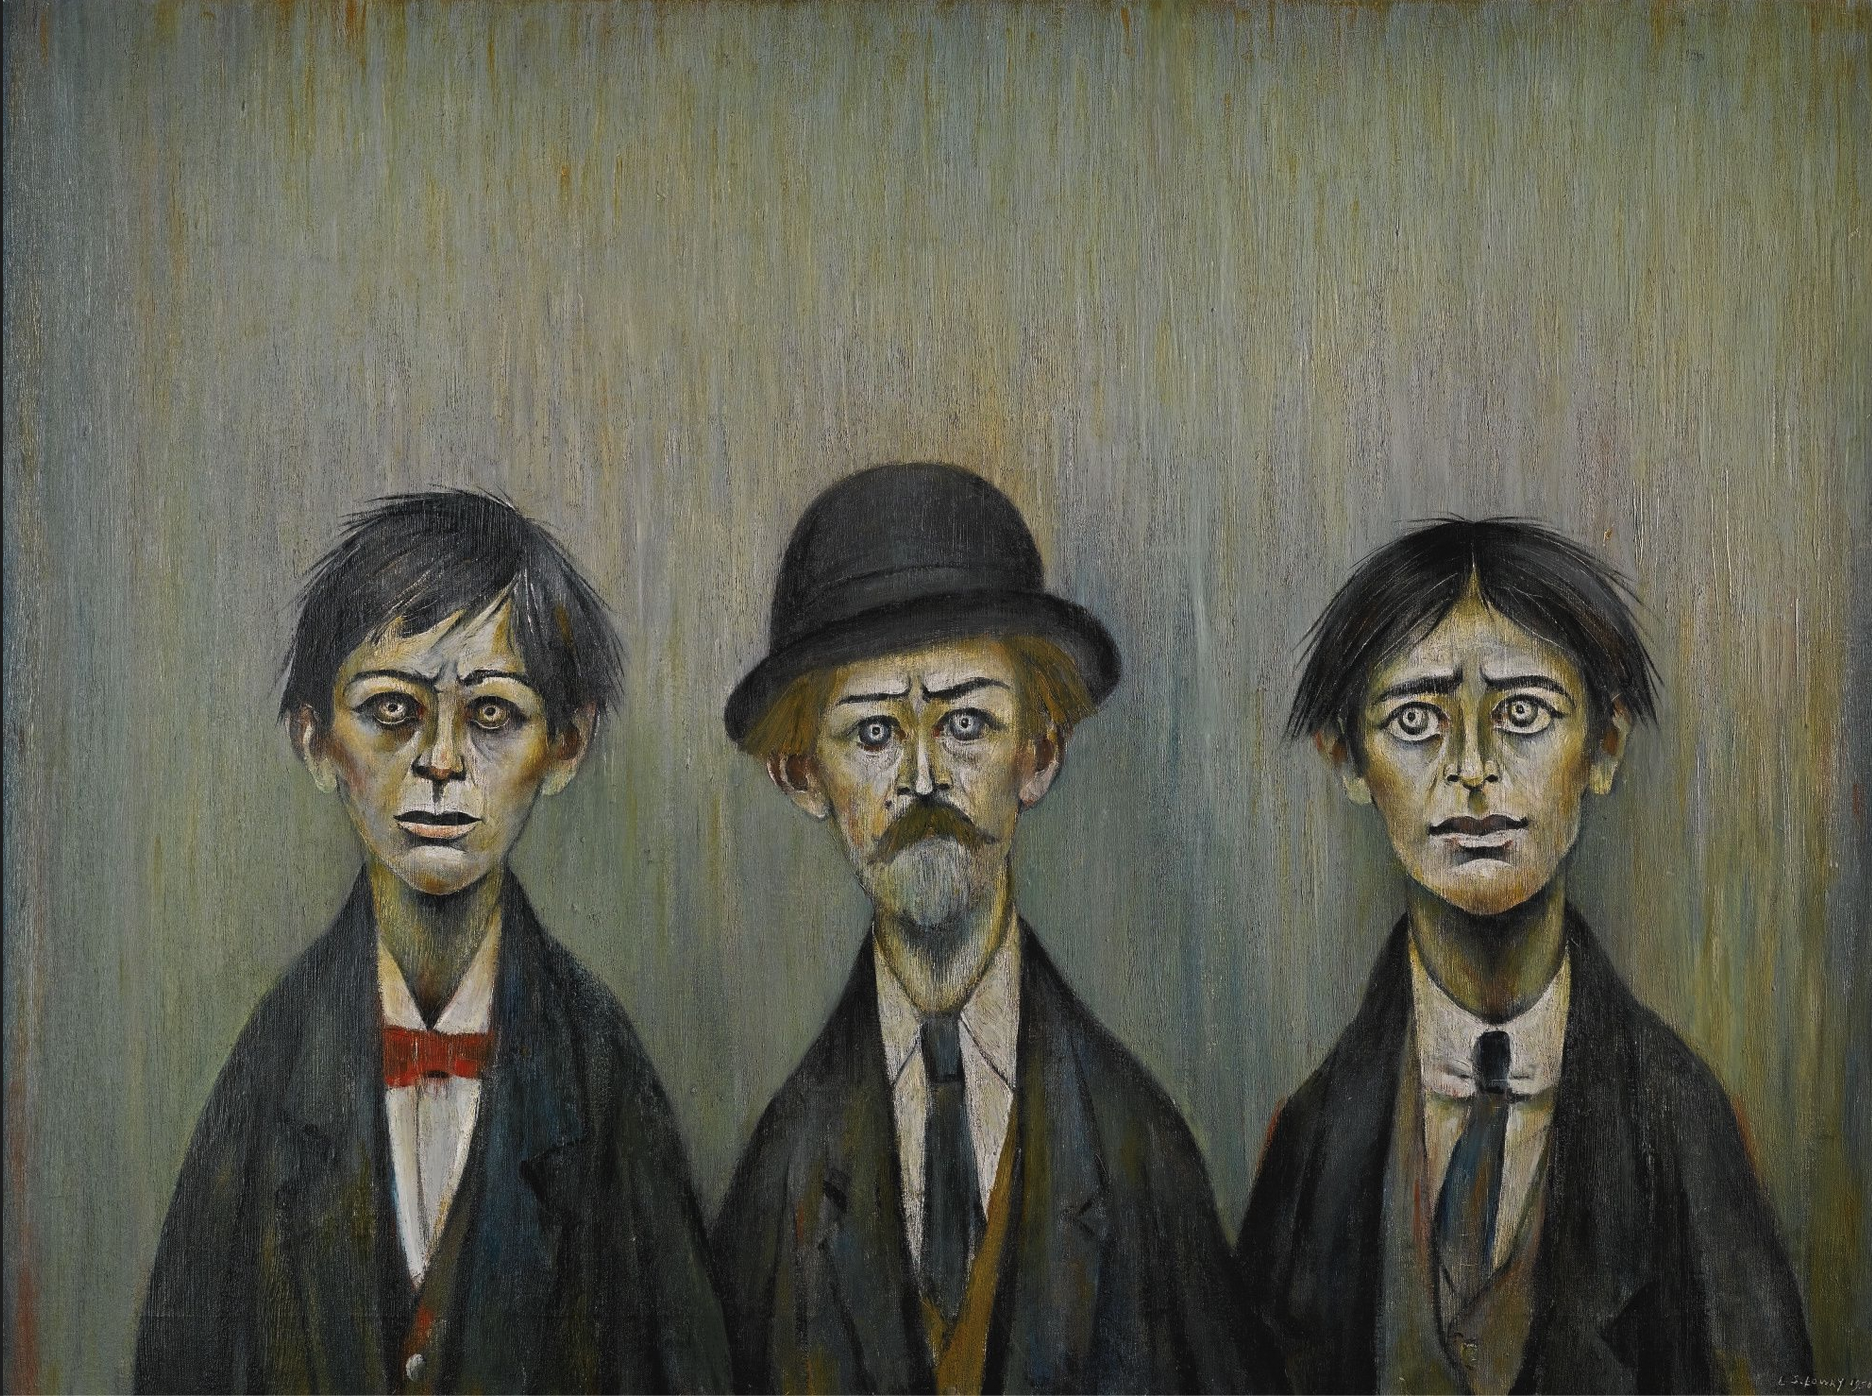 Father and two Sons (1950) by Laurence Stephen Lowry (1887 - 1976), English artist.